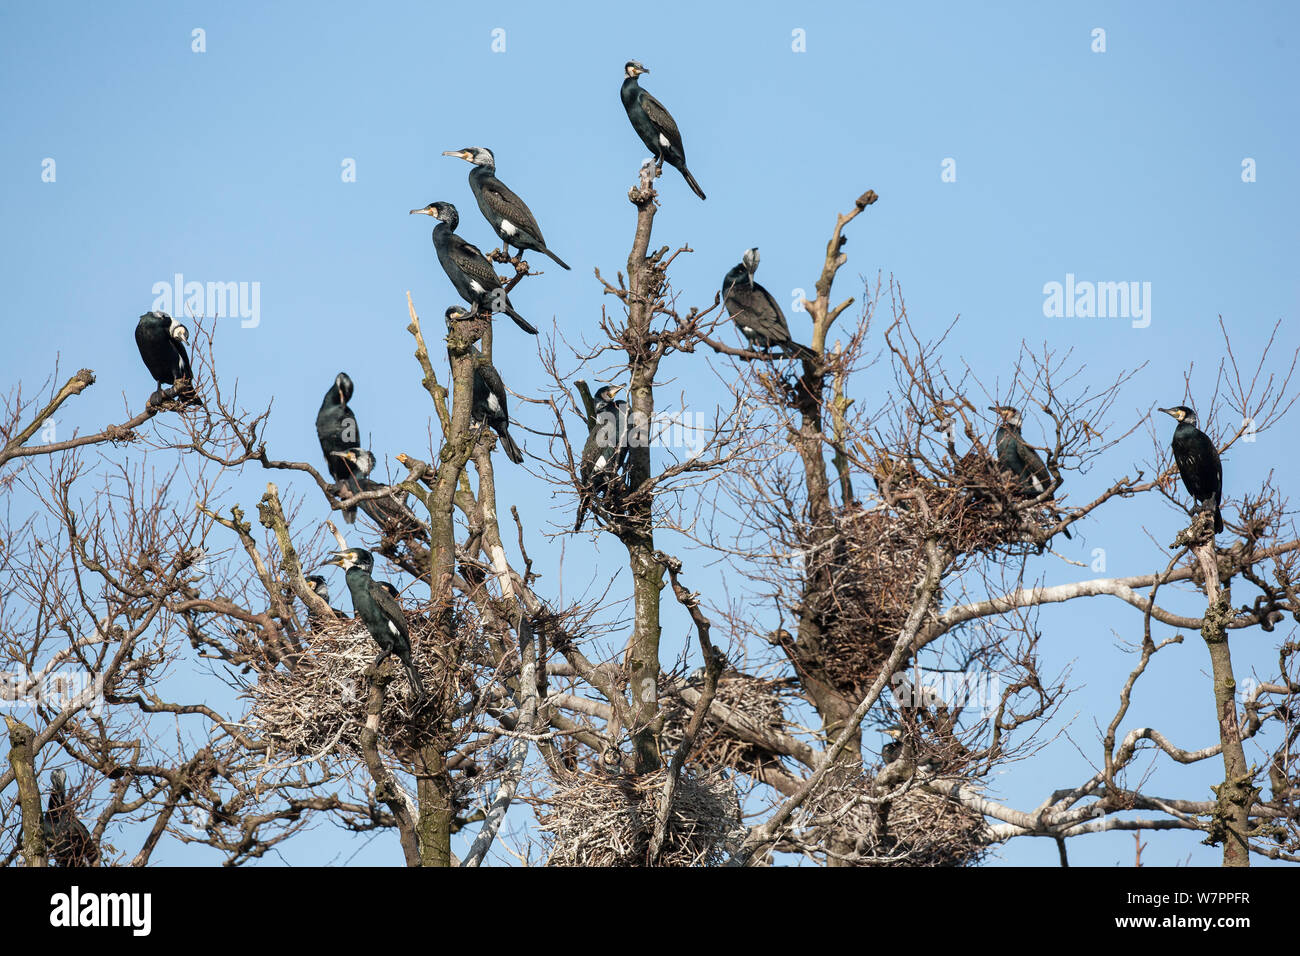 Great cormorants (Phalacrocorax carbo sinensis), adults in breeding plumage, perched on nesting trees of the colony in Niederhof, Germany, March Stock Photo